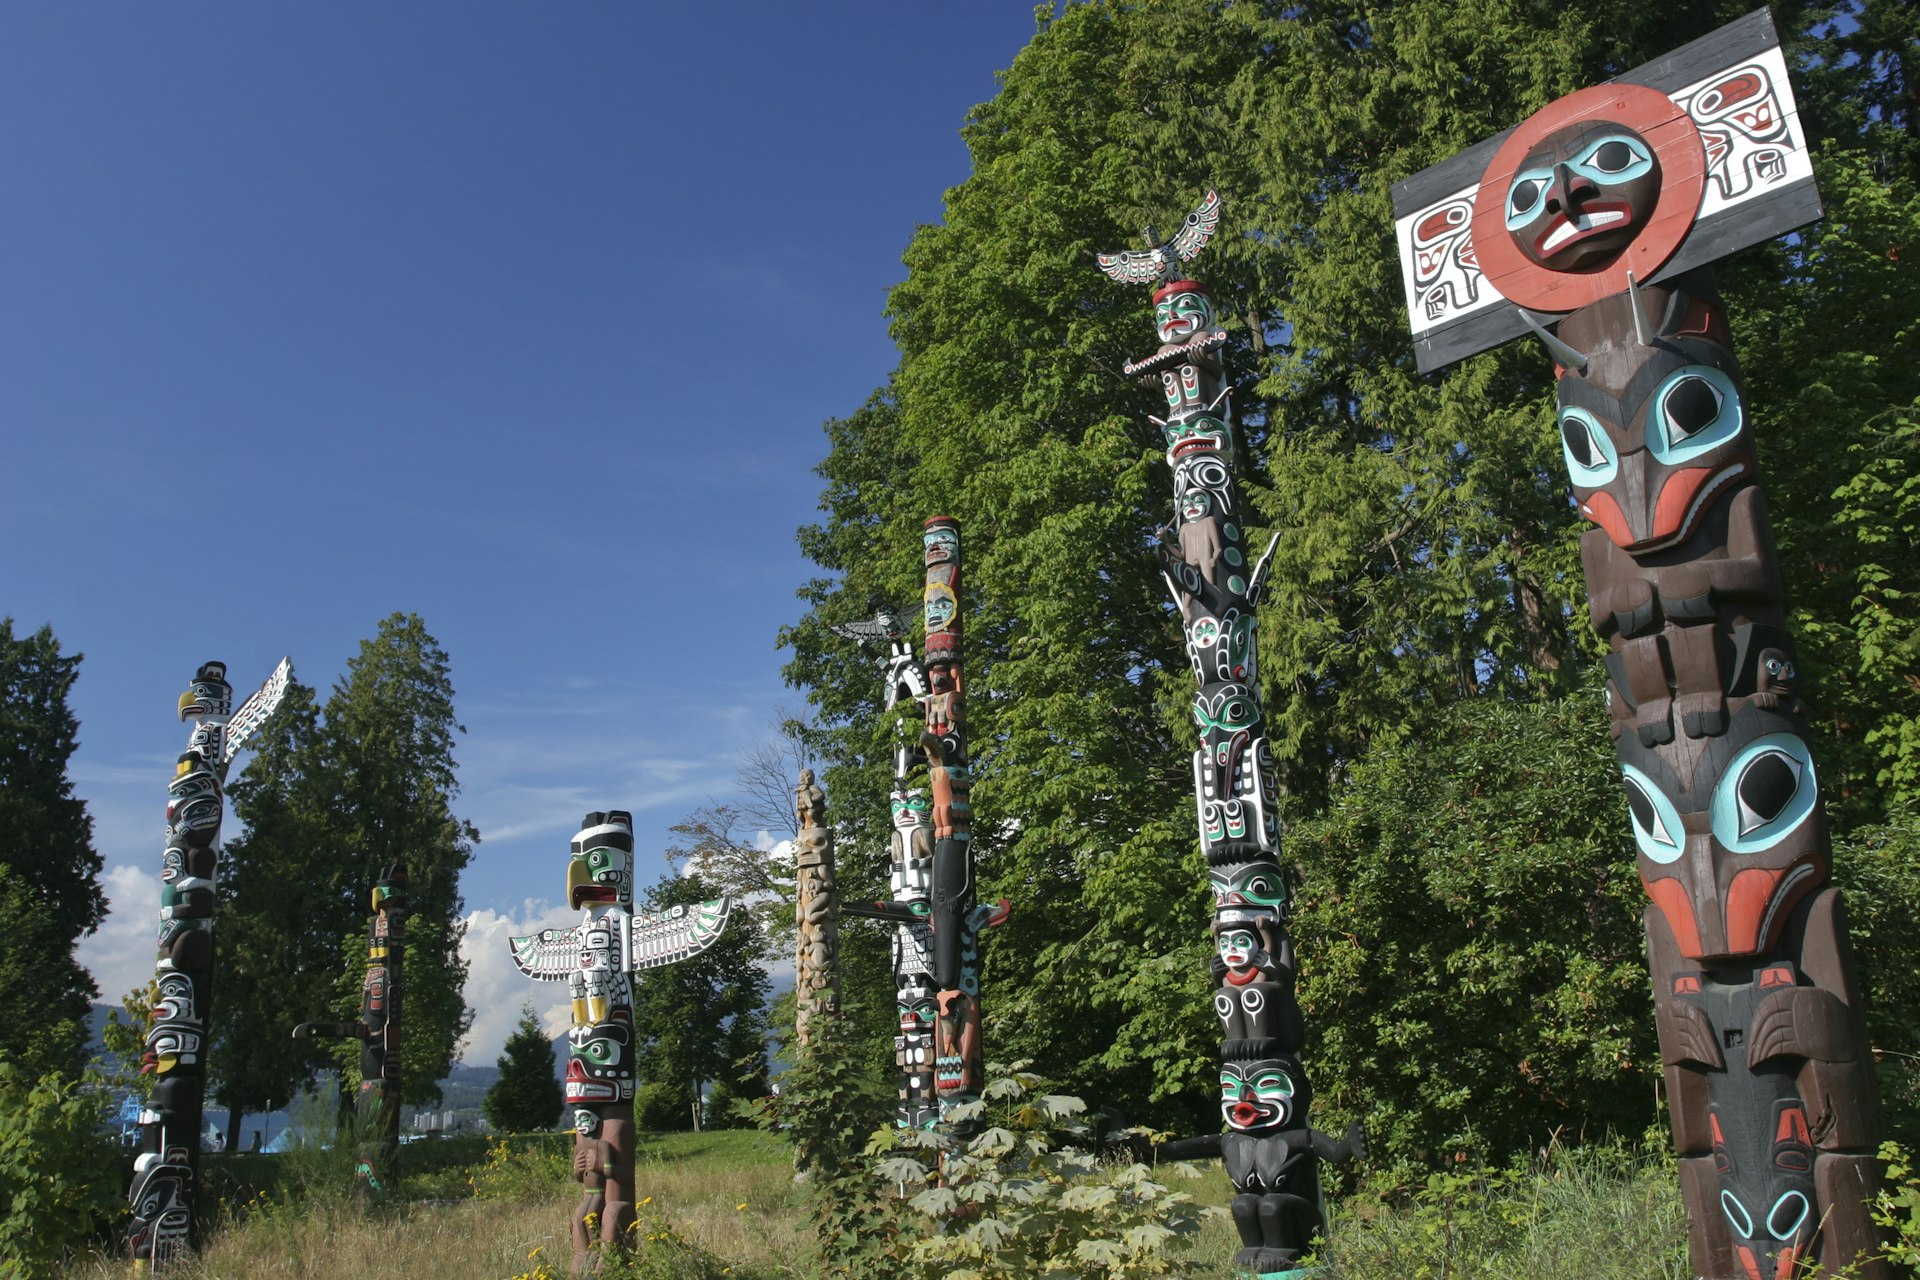 Totem poles in Vancouver, surrounded by trees and greenery 